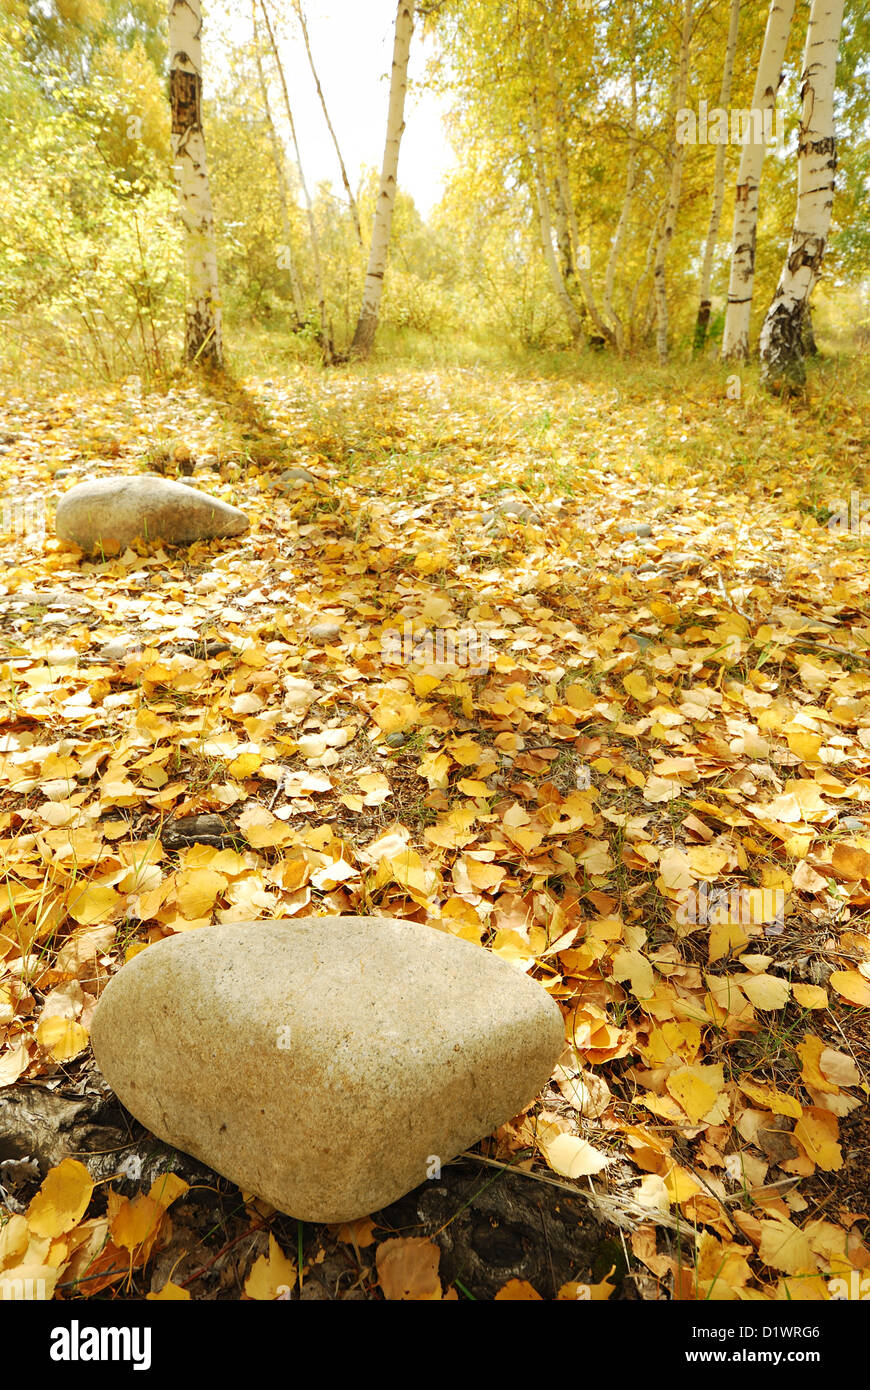 Autumn deep wood fallen leave with nature rocks surrounded by trees in bright golden yellow color. Stock Photo